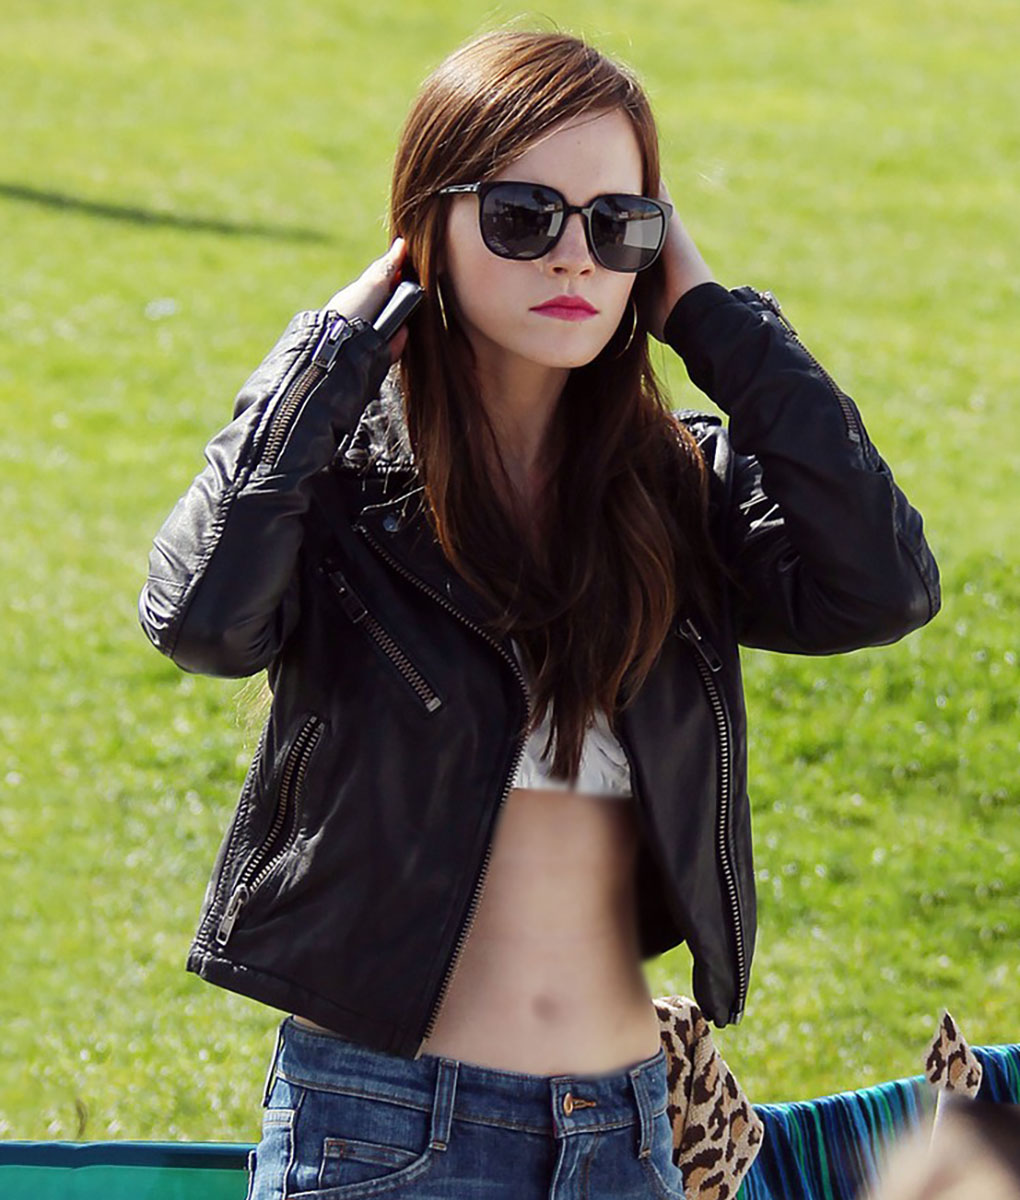 Emma Watson shows off her tiny stomach in revealing costume during the filming of “The Bling Ring” in Los Angeles